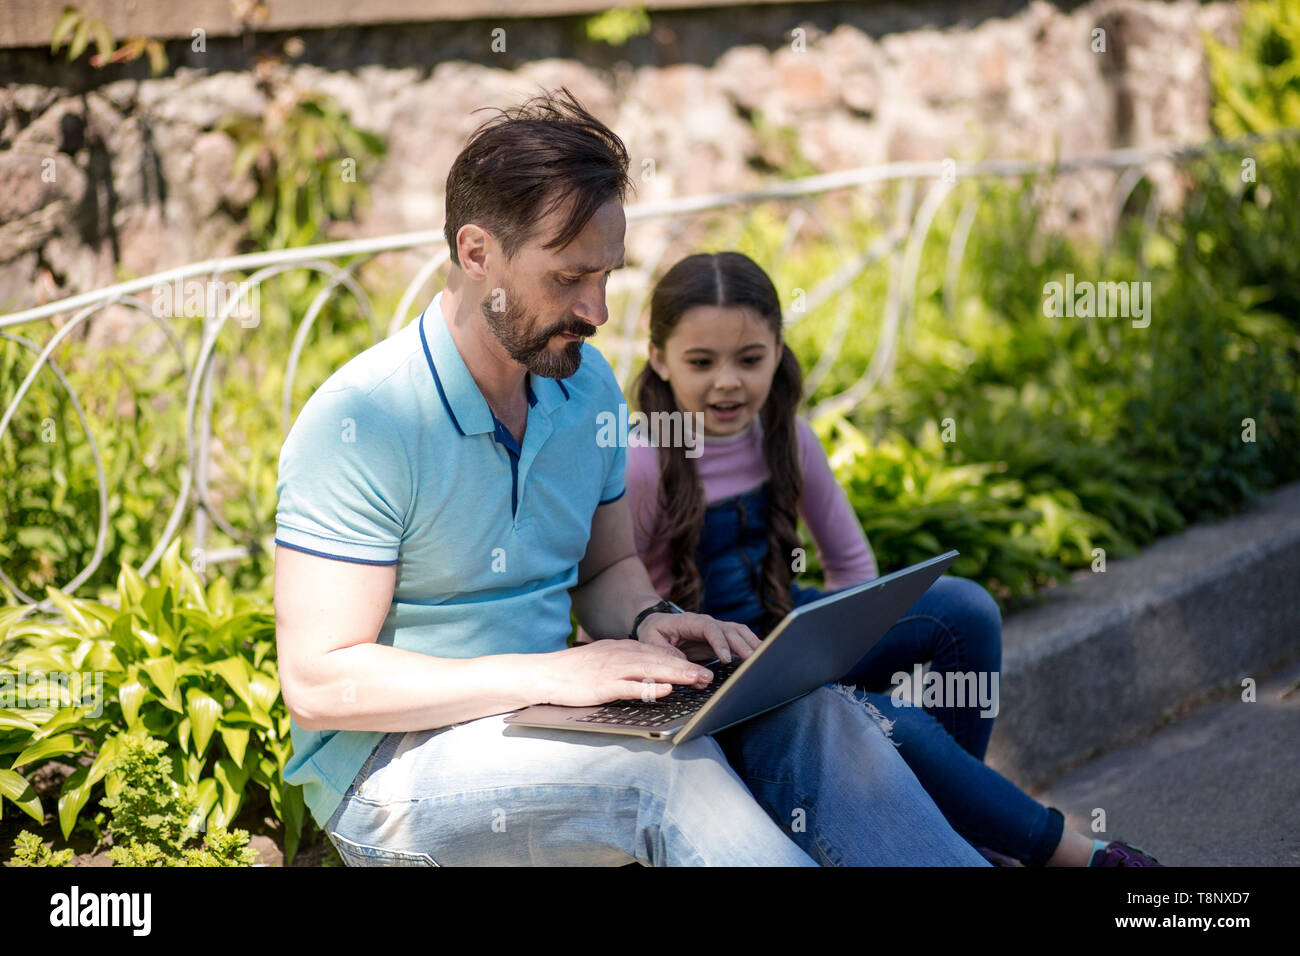 Father Siting Together With His Daughter And Looking On The Laptop Outdoors. Stock Photo